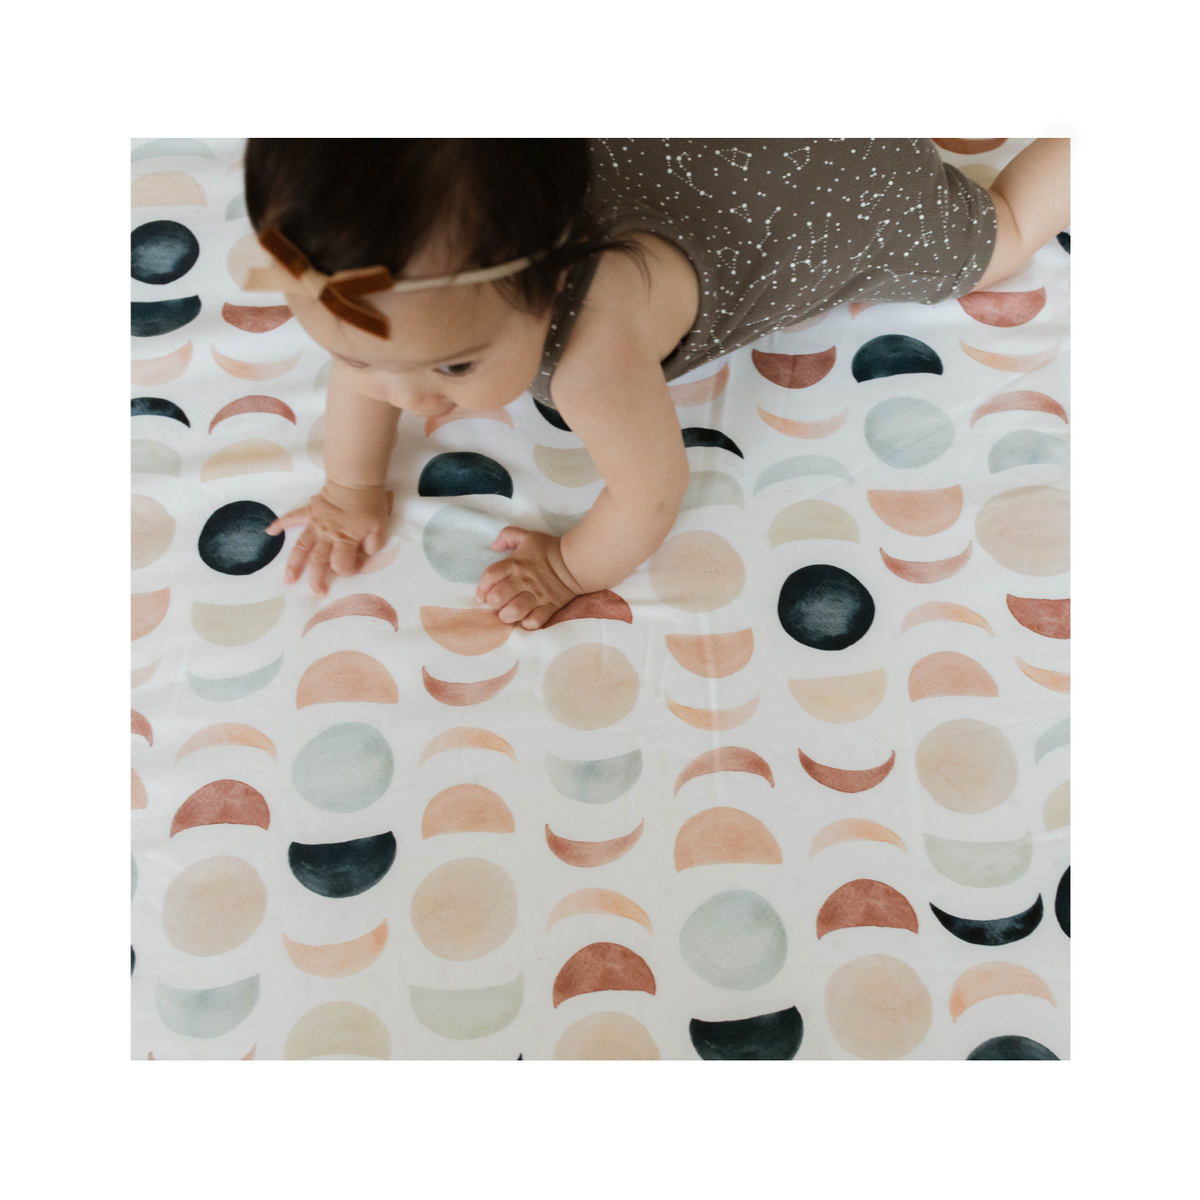 Lunar Phases Padded Playmat